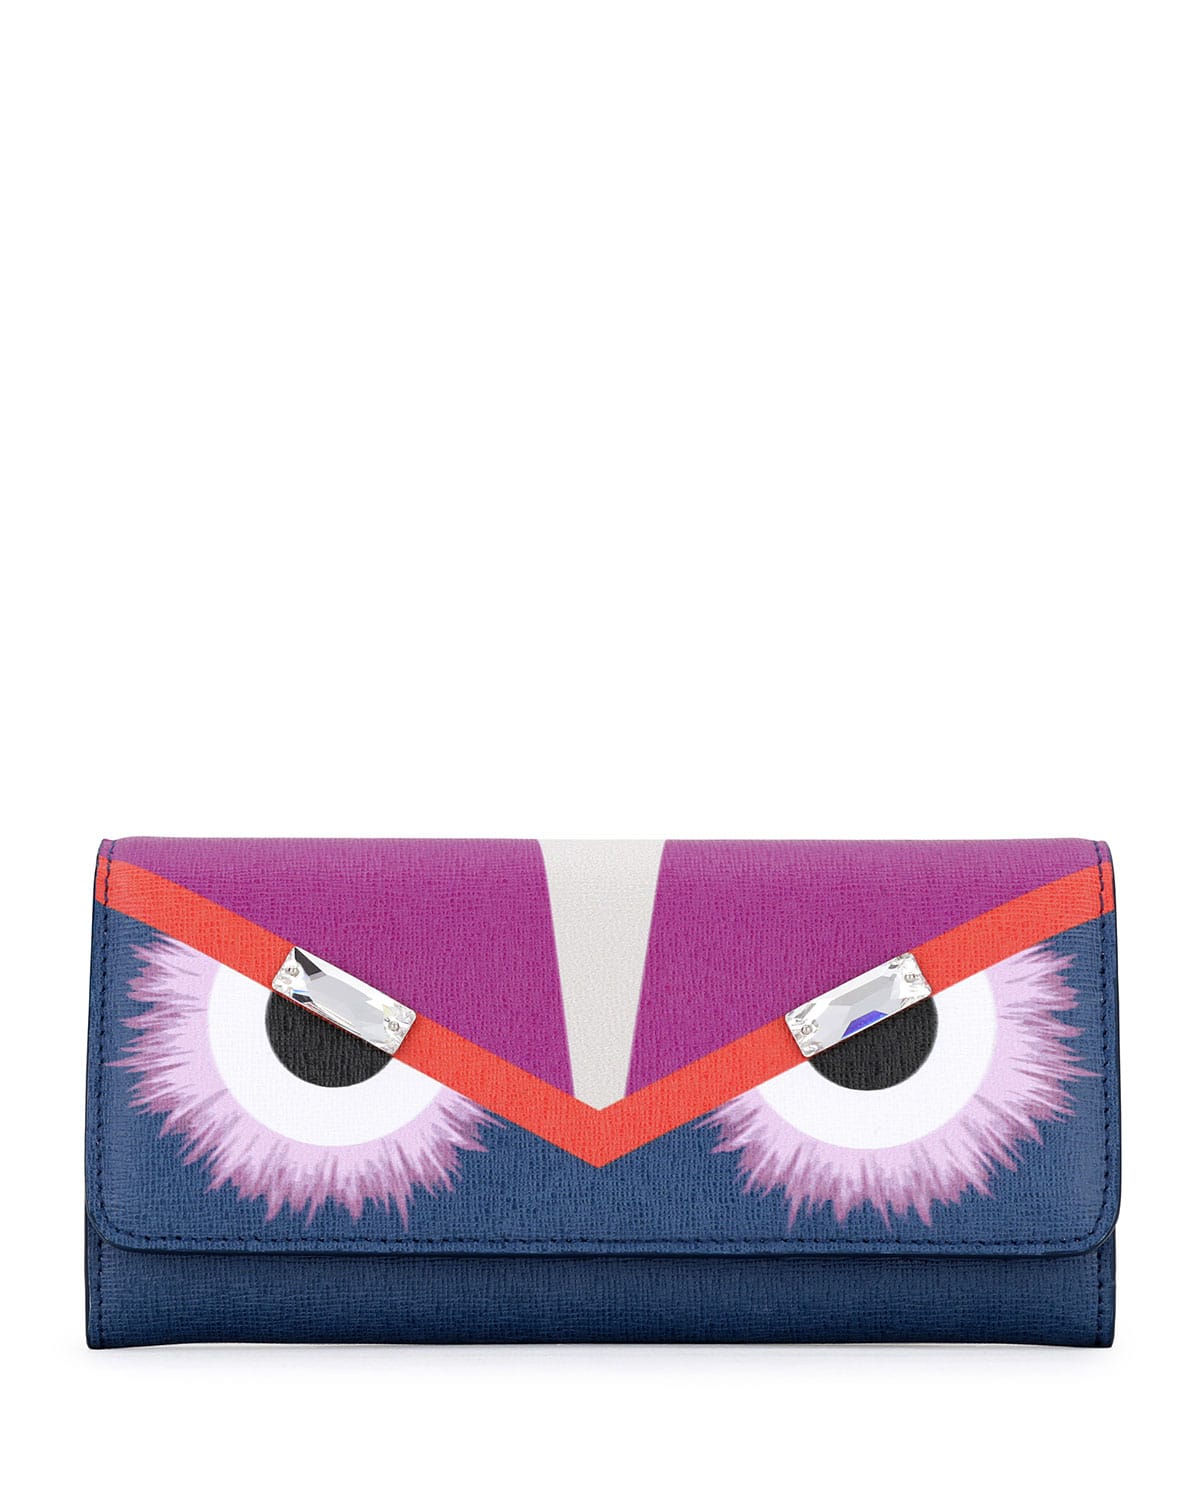 Fendi Small Leather Goods Reference Guide - Spotted Fashion